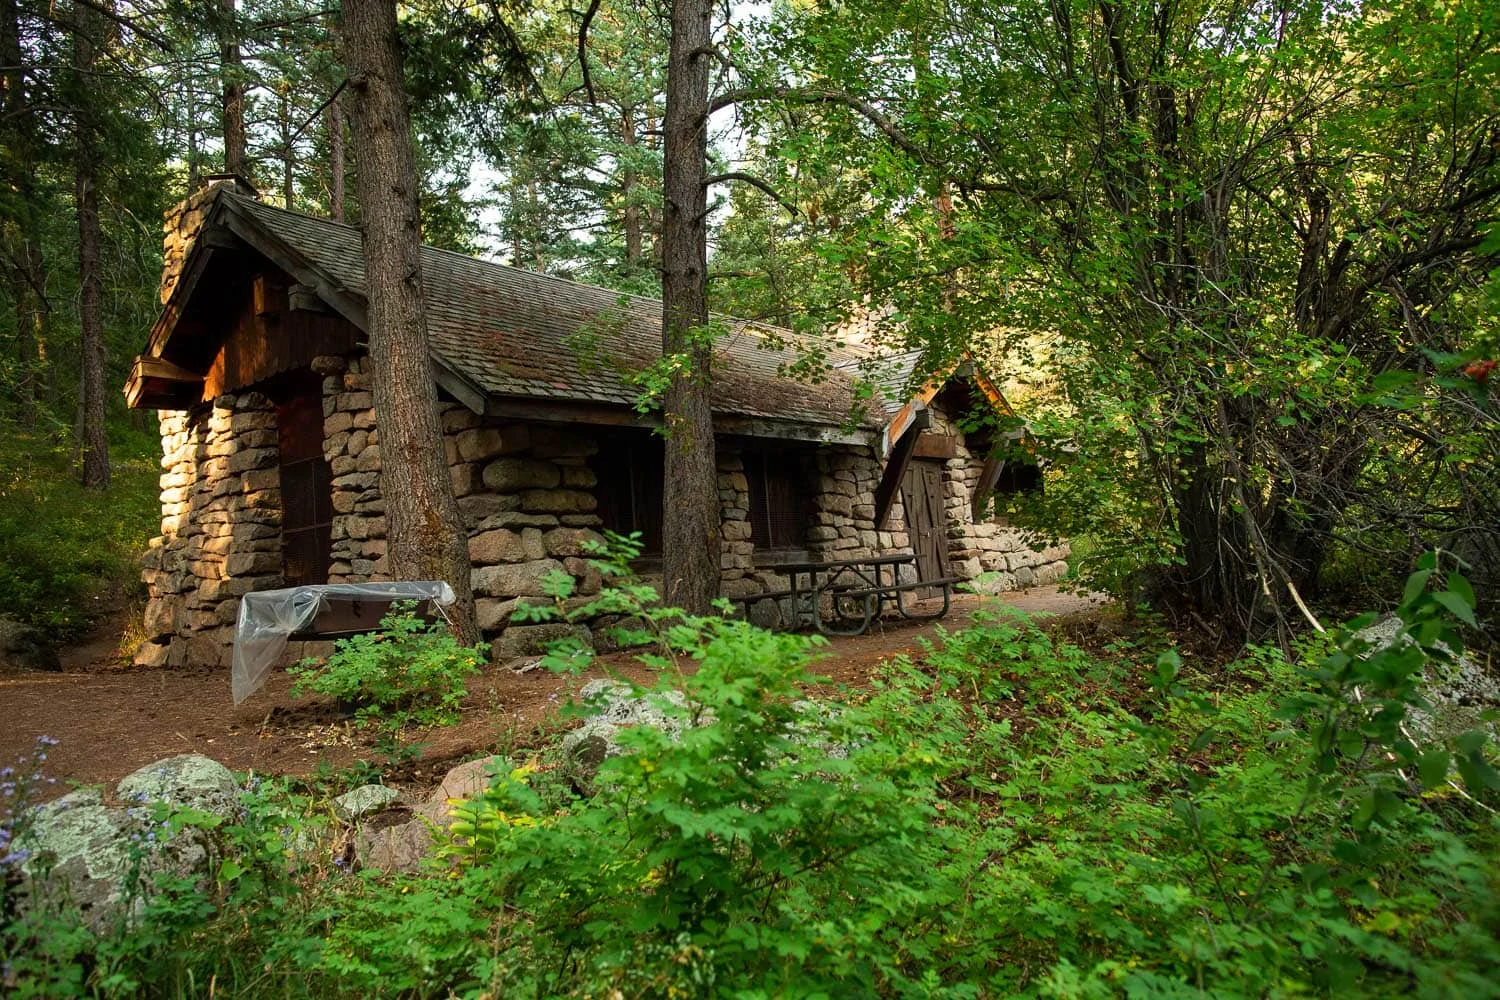 A stone cabin is surrounded by green forest in the mountains of Colorado near Boulder.